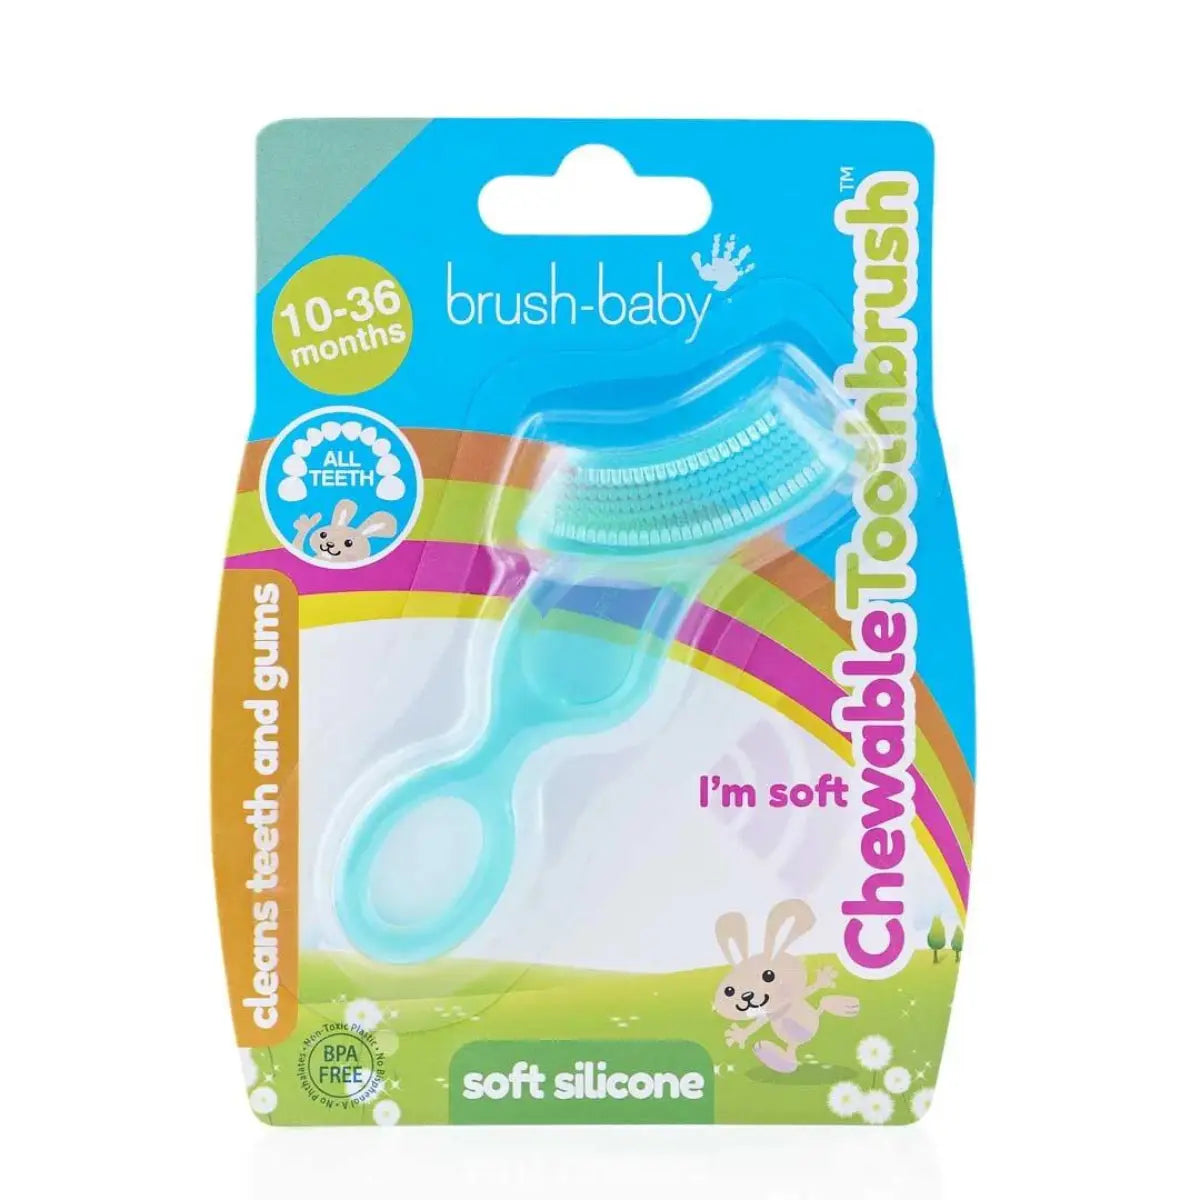 award-winning and innovative silicone baby first toothbrush and baby teether packaging